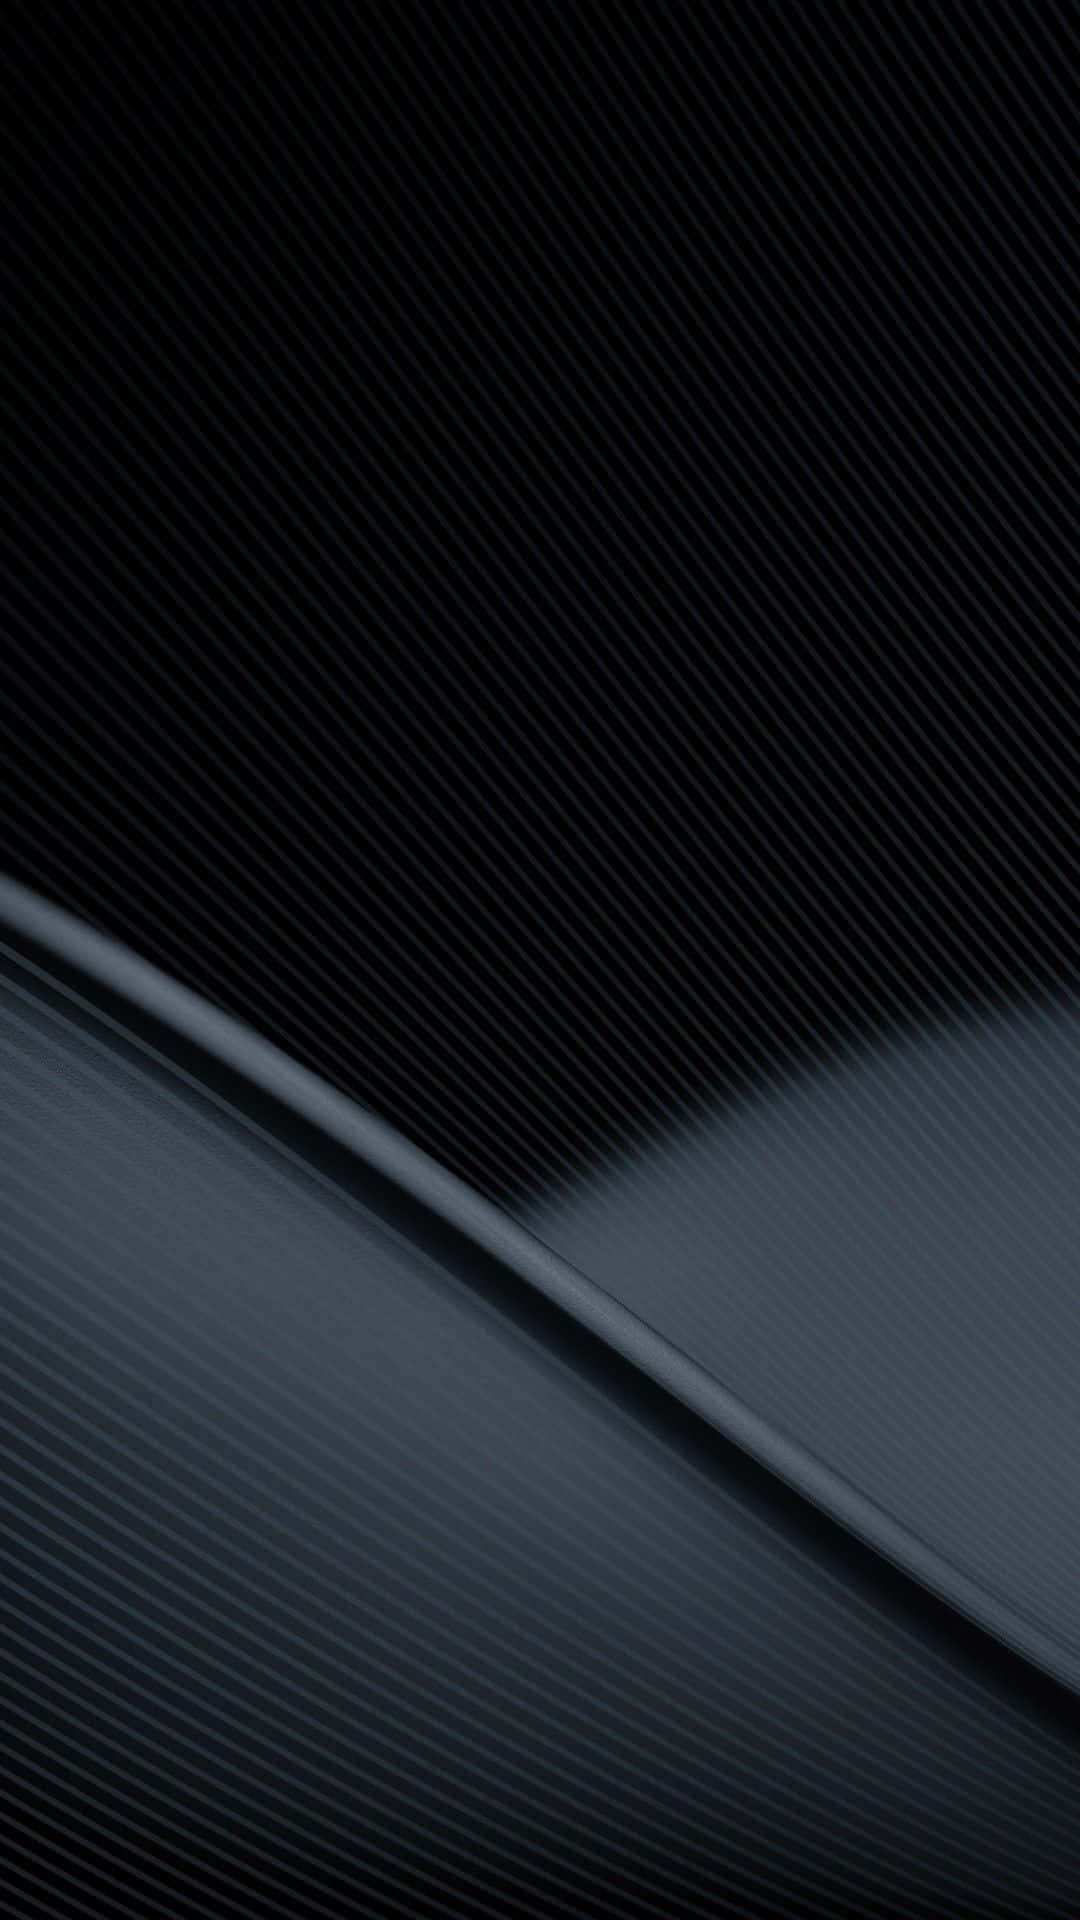 A Black Background With A Black Curved Line Wallpaper